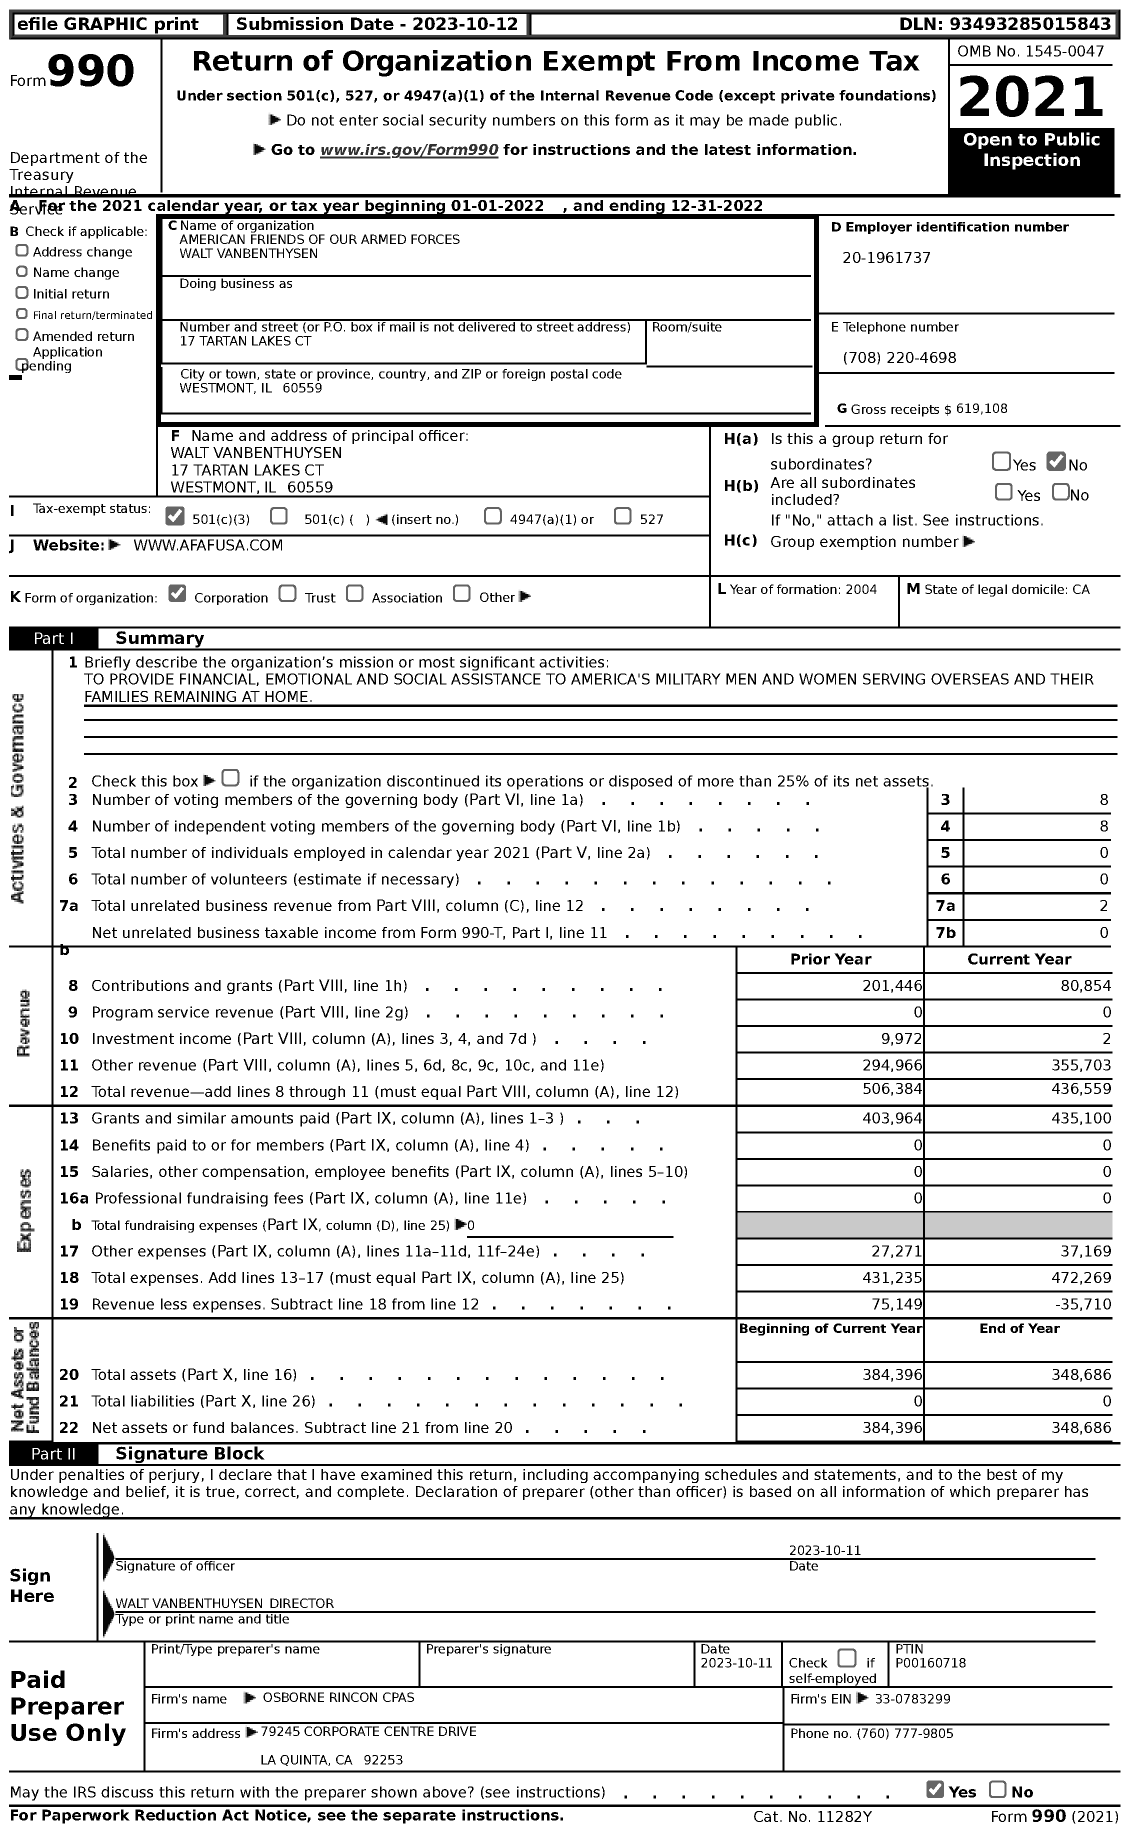 Image of first page of 2022 Form 990 for American Friends of Our Armed Forces Walt Vanbenthysen